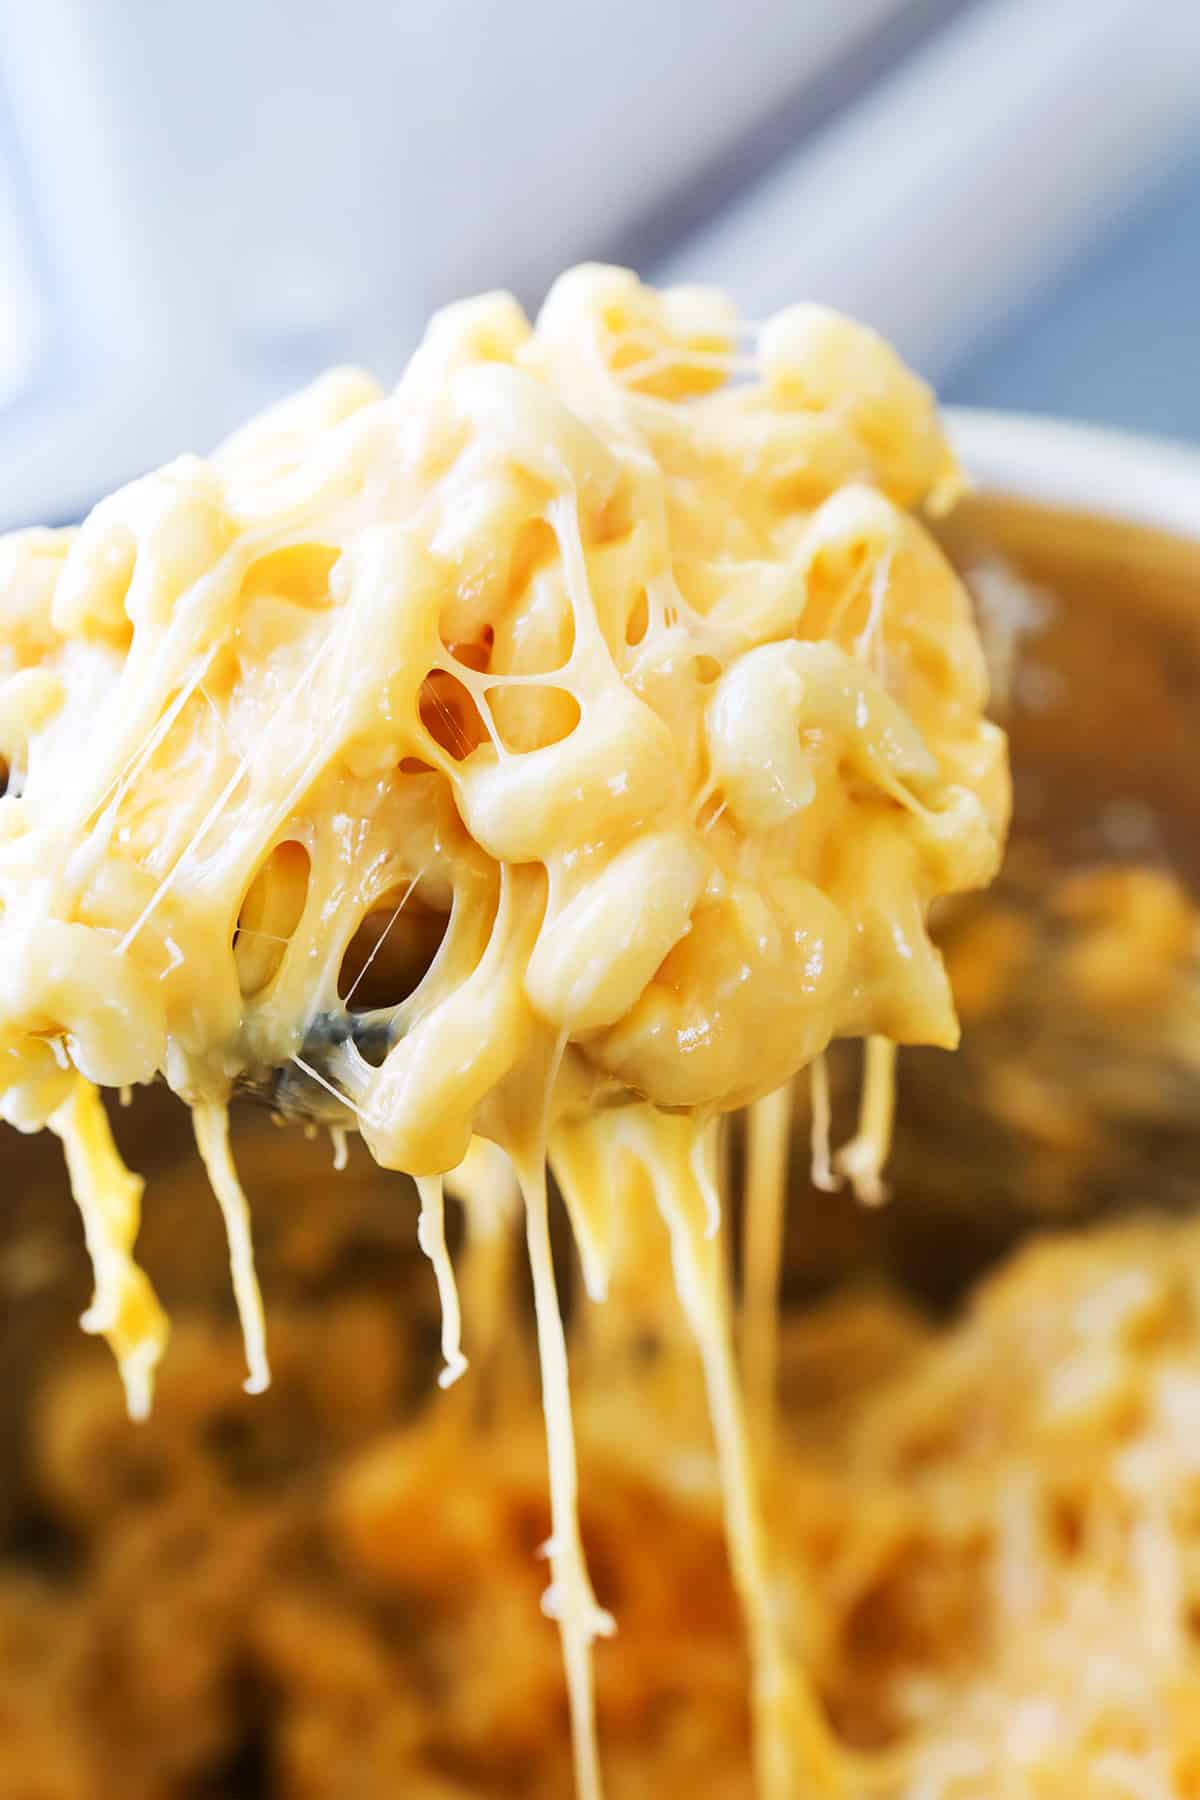 Huge gooey spoonful of mac and cheese coming out of pot.